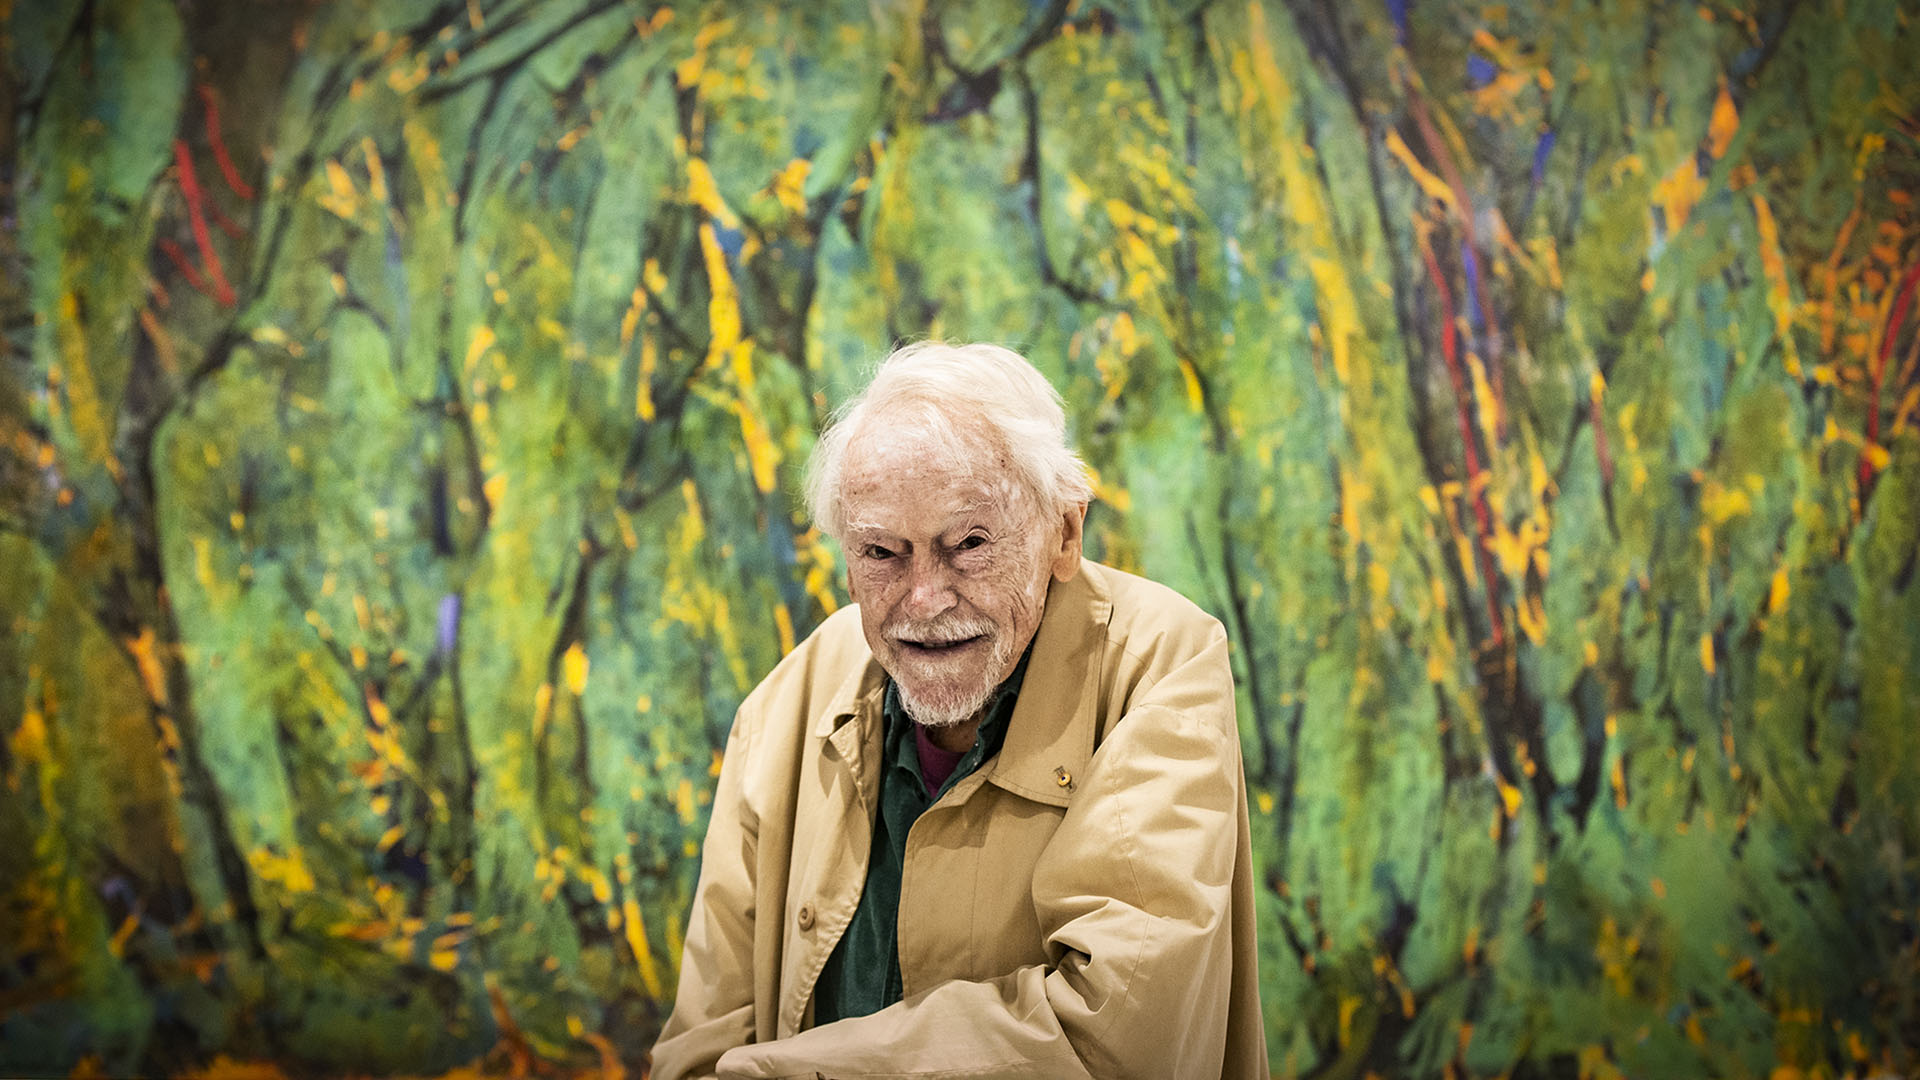 The University of Wollongong is celebrating the life and art of renowned artist Guy Warren AM, with the launch of an exhibition that showcases his work and his immense contribution to Australia’s artistic landscape.